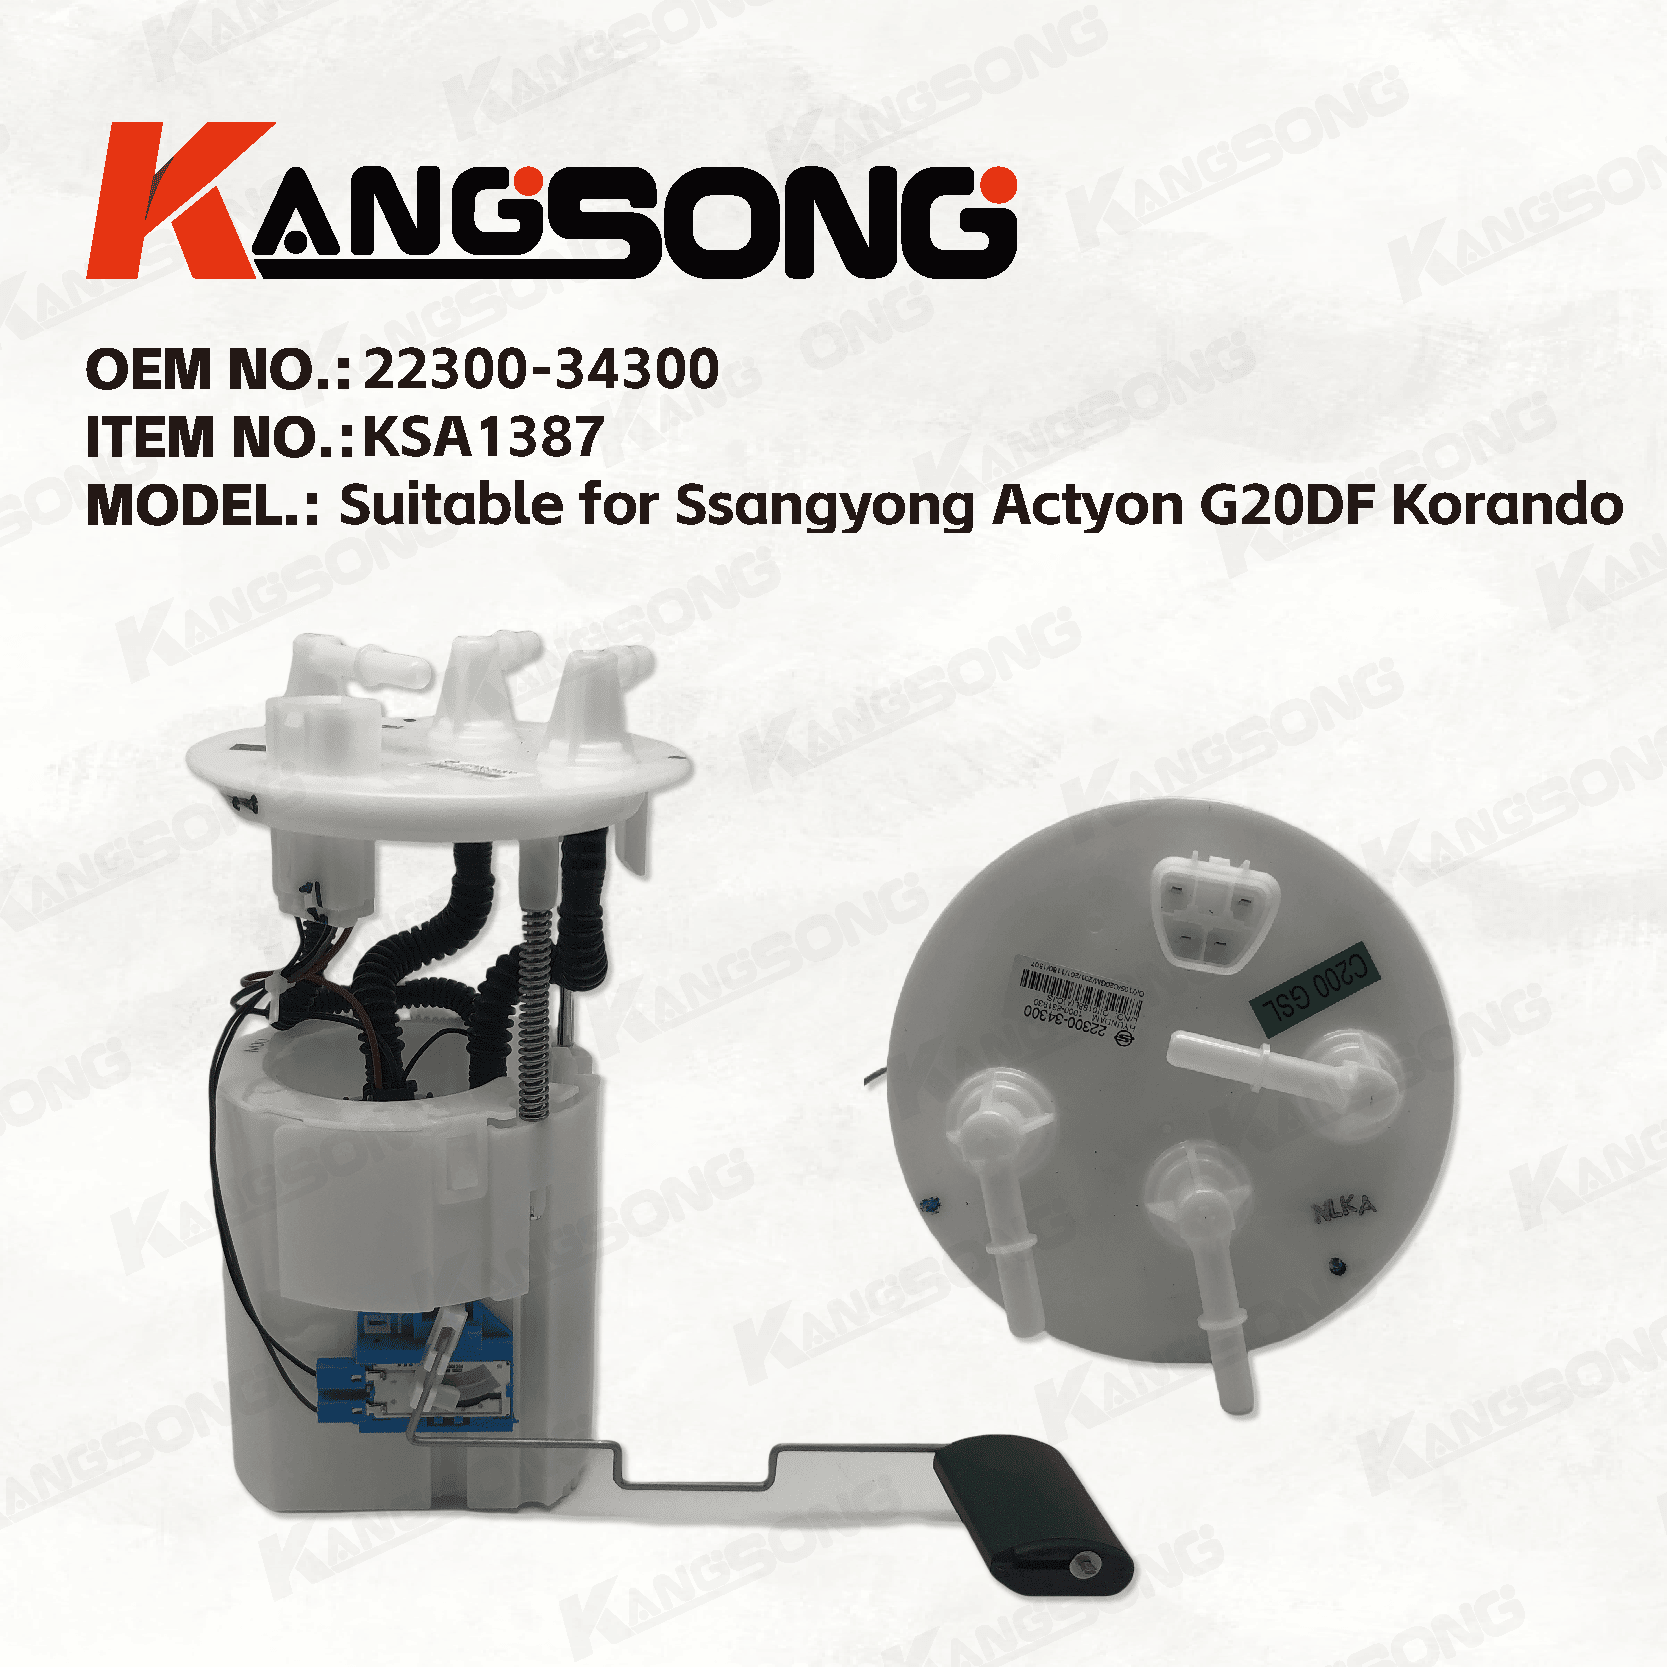 Applicable to Ssangyong Actyon G20DF Korando/22300-34300/Fuel Pump Assembly/ KS-A1387